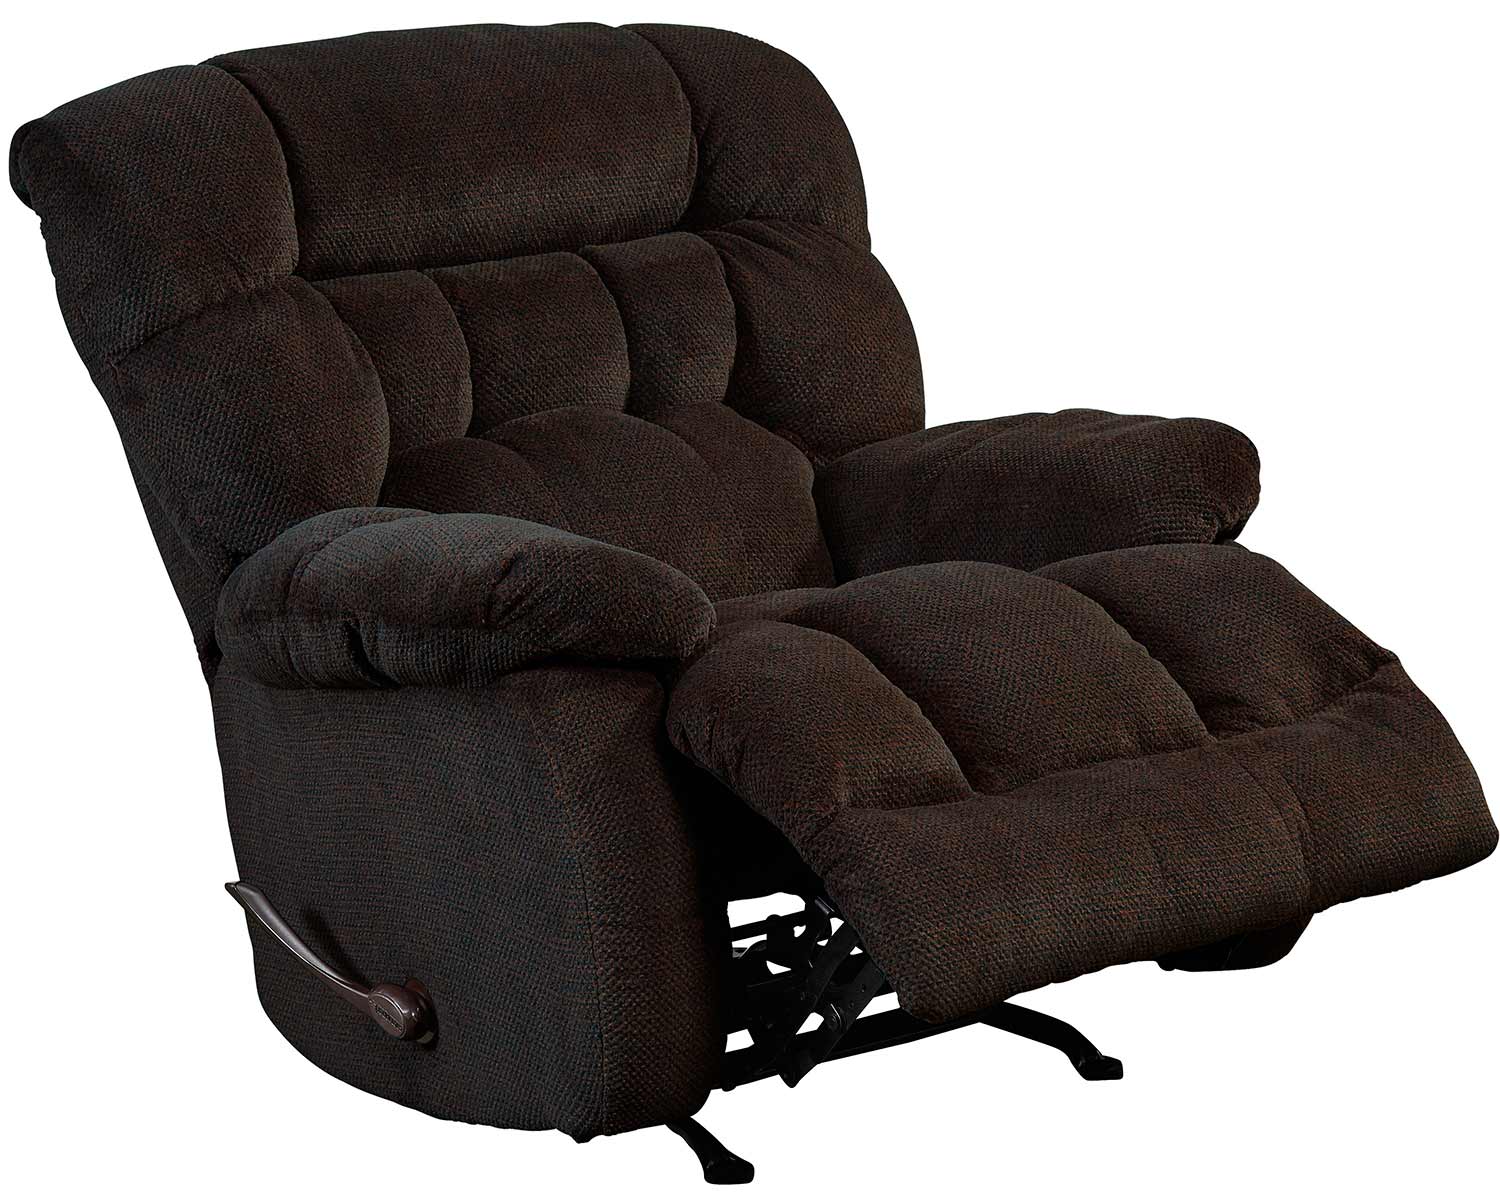 CatNapper Daly Chaise Rocker Recliner Chair - Chocolate